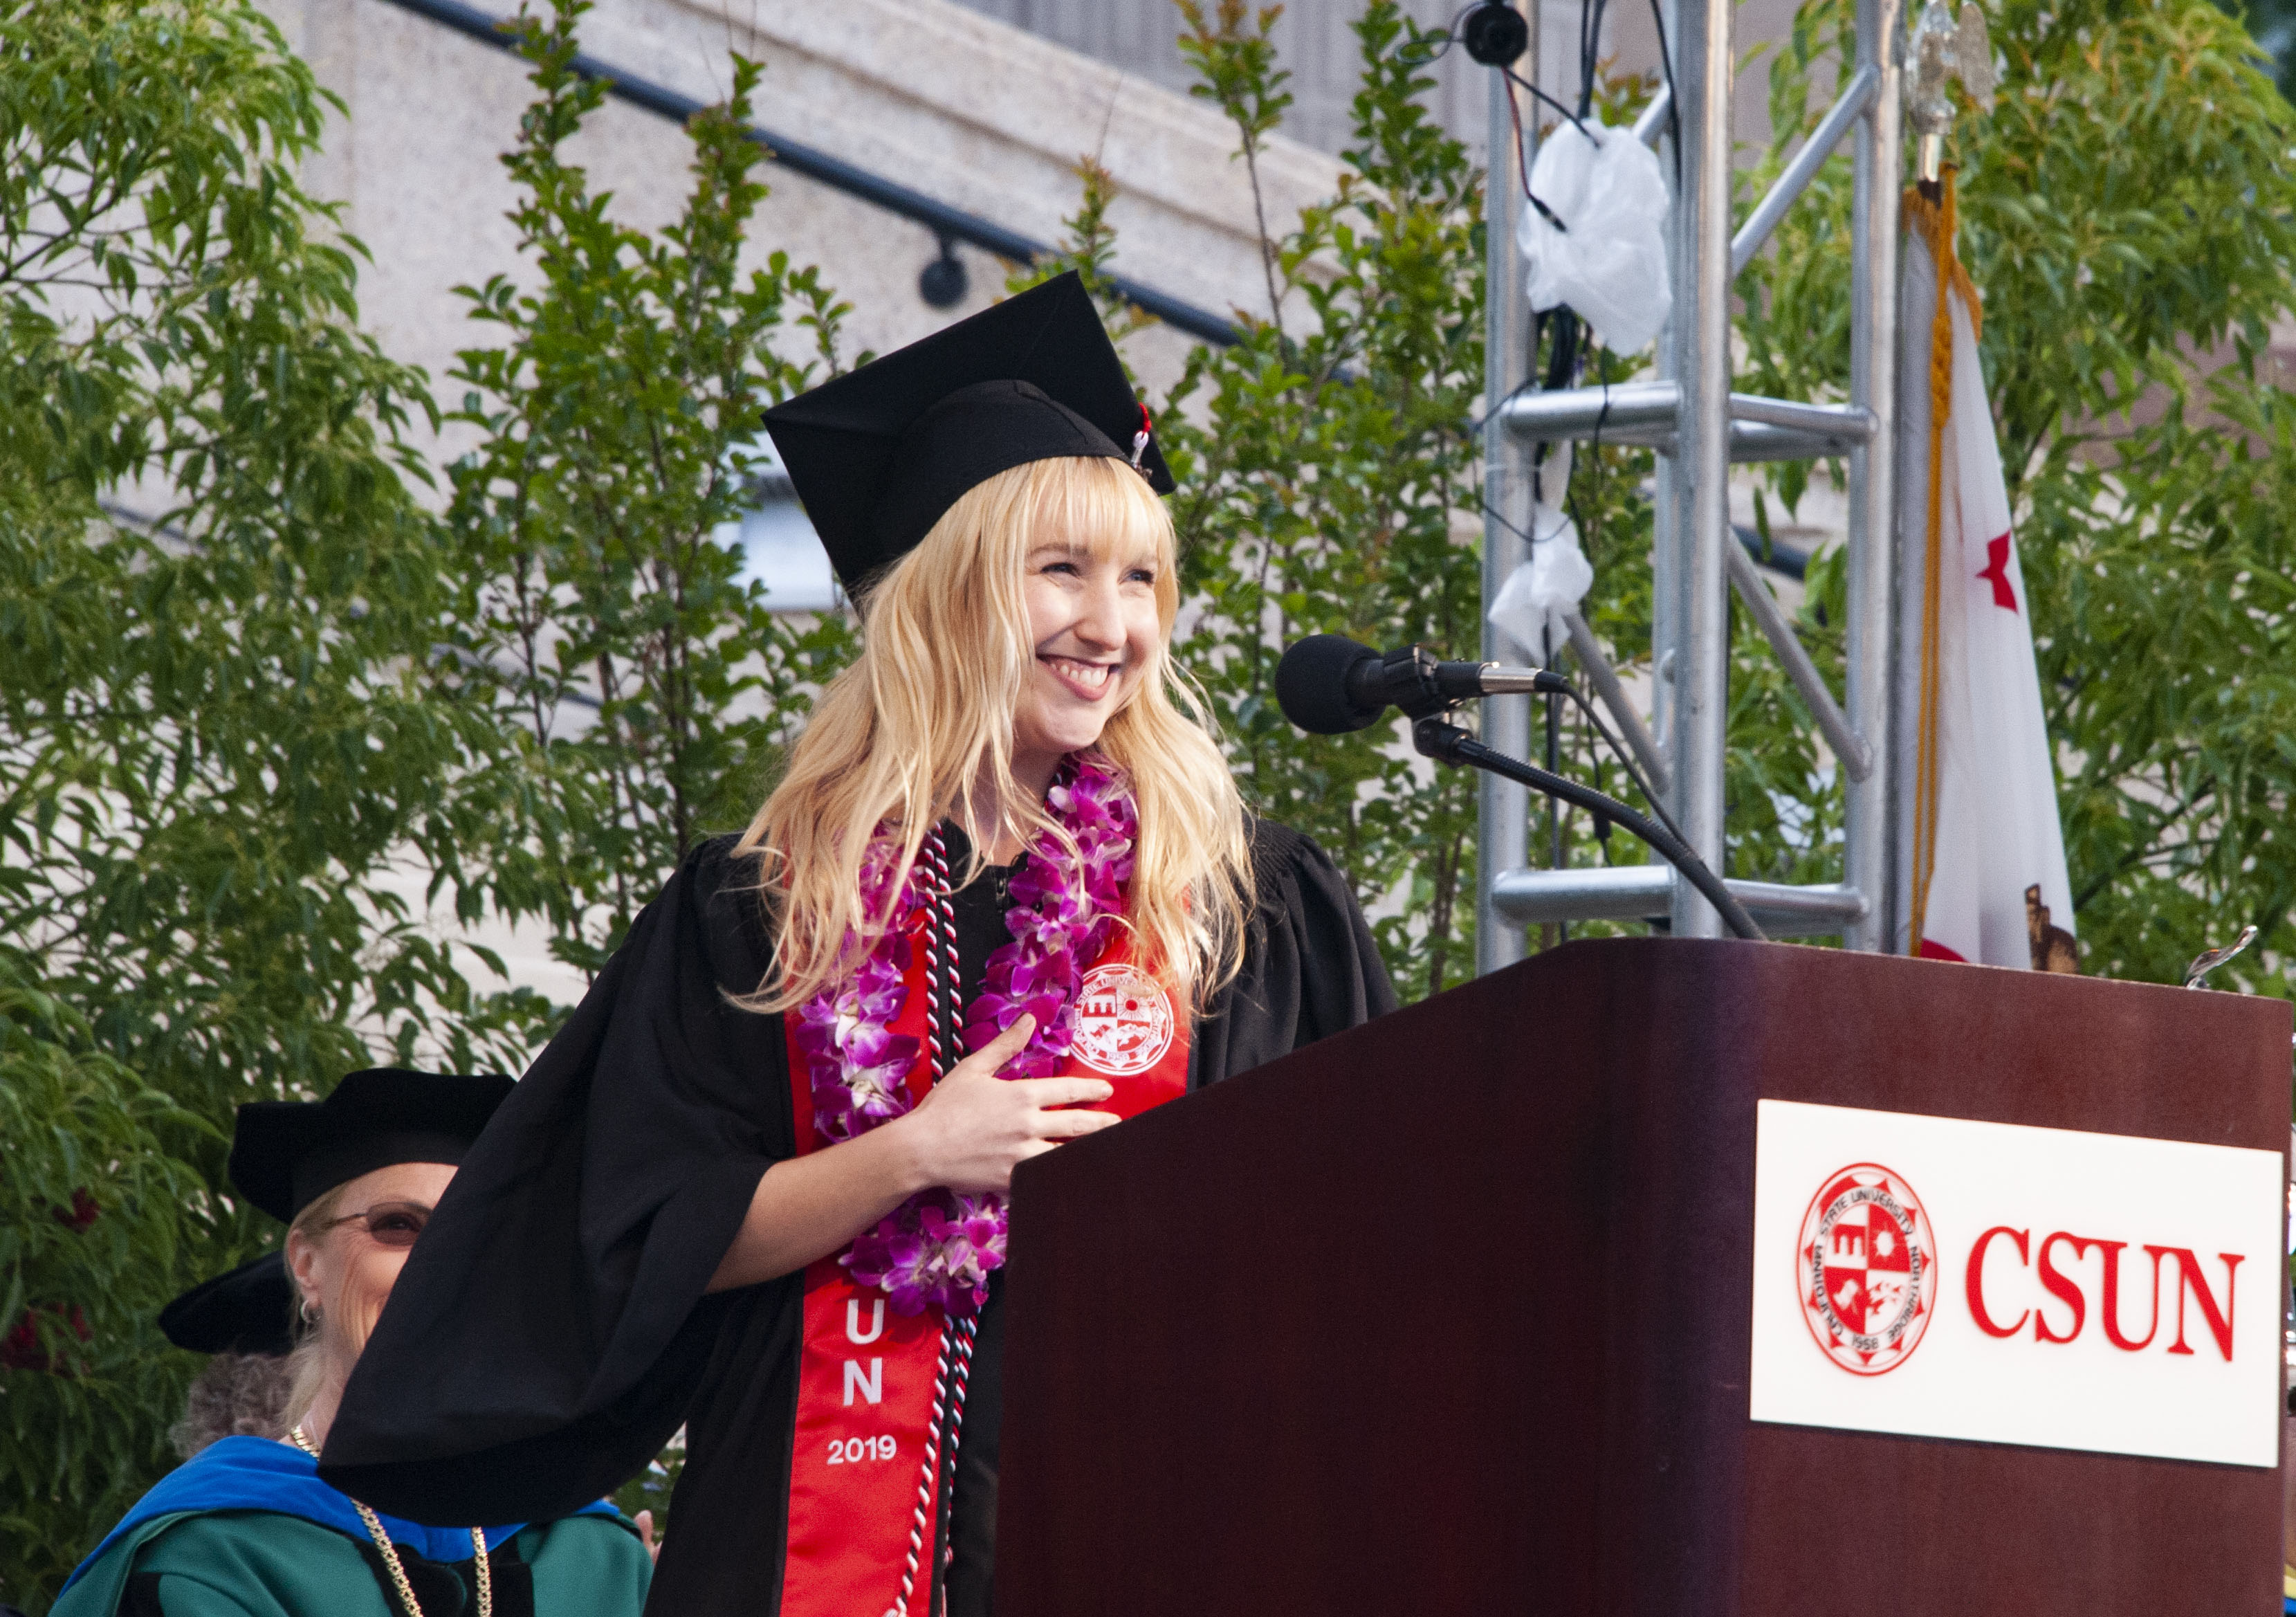 A member of the Class of 2019 speaks at a podium at commencement.